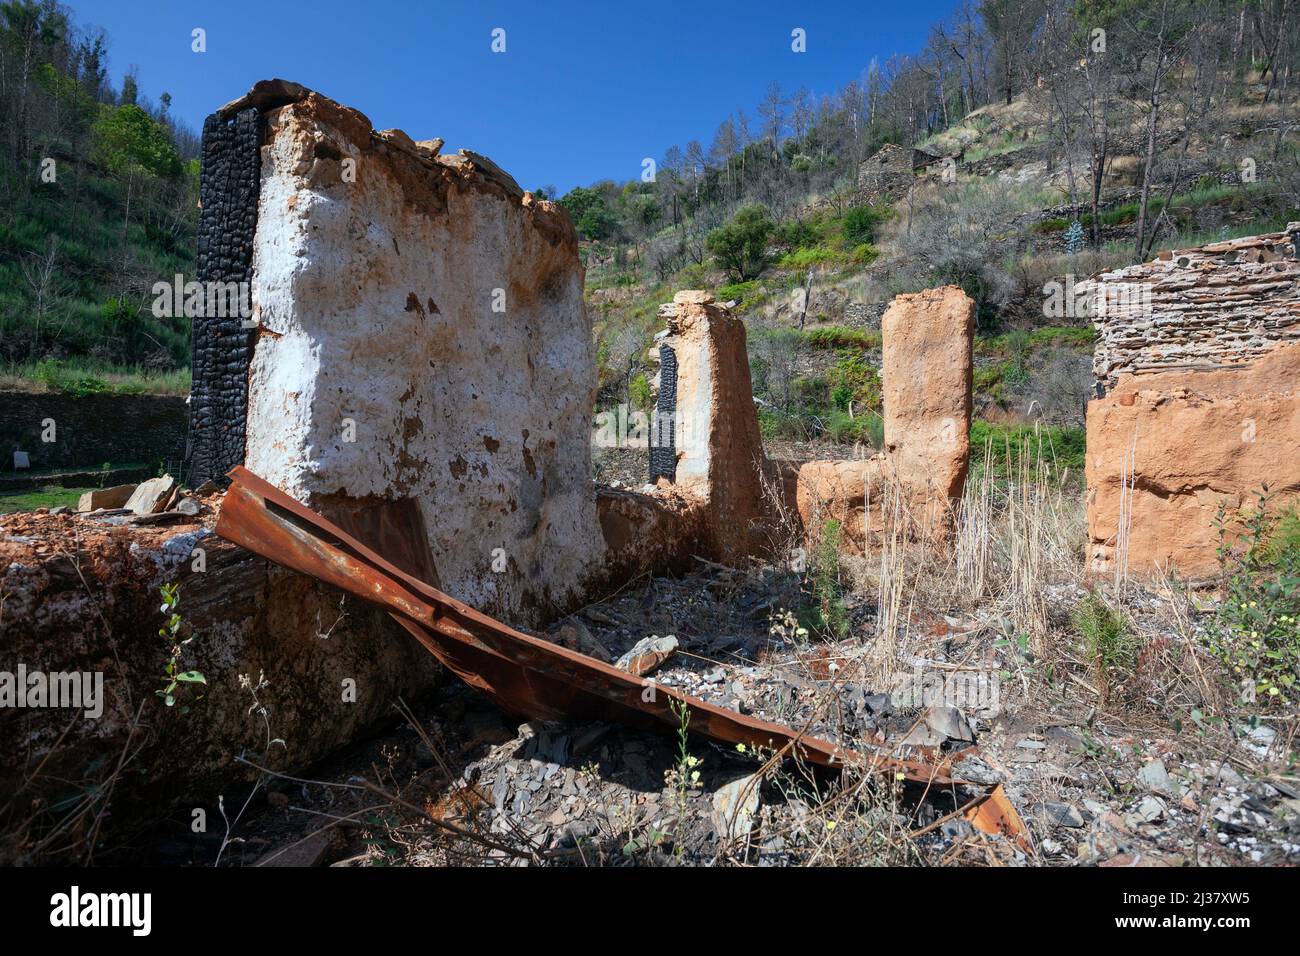 Europe, Portugal, District of Coimbra, Near Góis, 'The Goatshed' Ruins (near Colmeal) showing Remains of Stone Walls after the devastating fires of Stock Photo